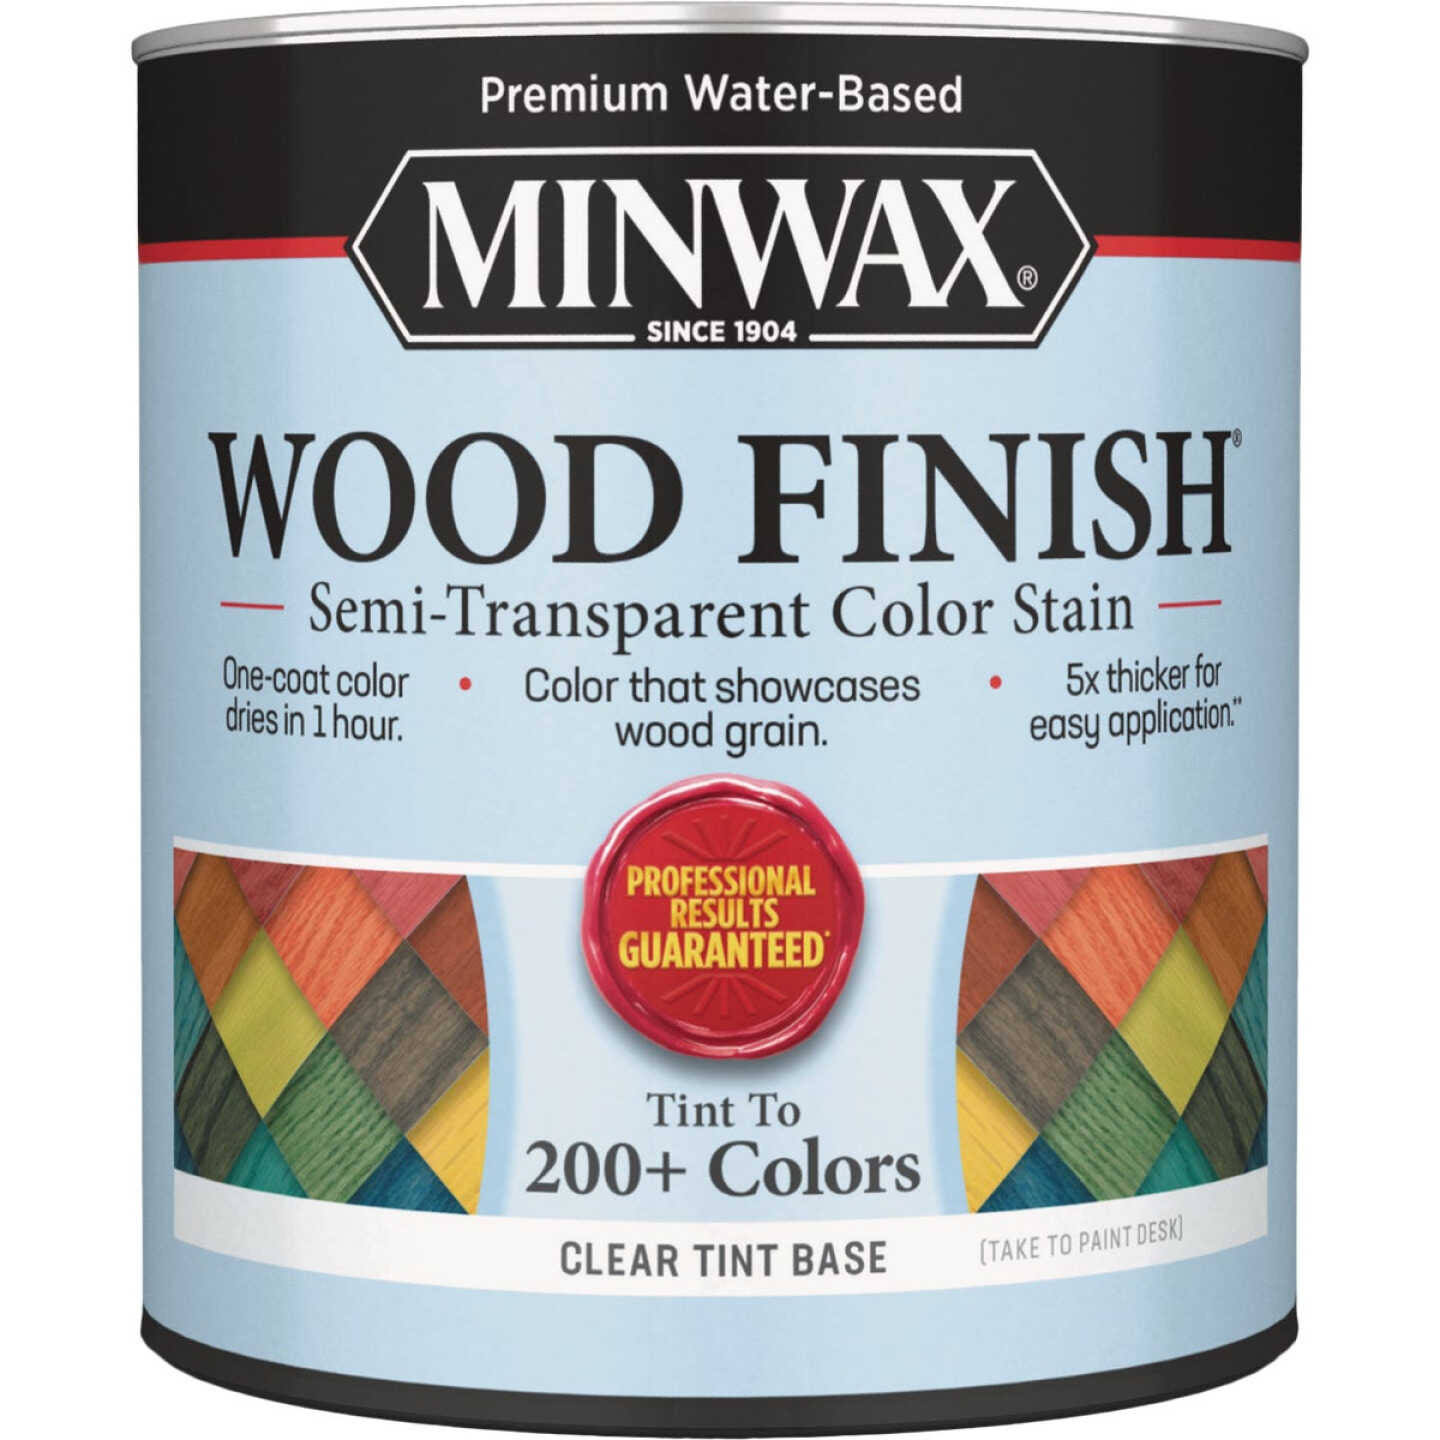 Minwax Wood Finish Water-Based Semi-Transparent Clear Tint Base Wood Stain 1 qt